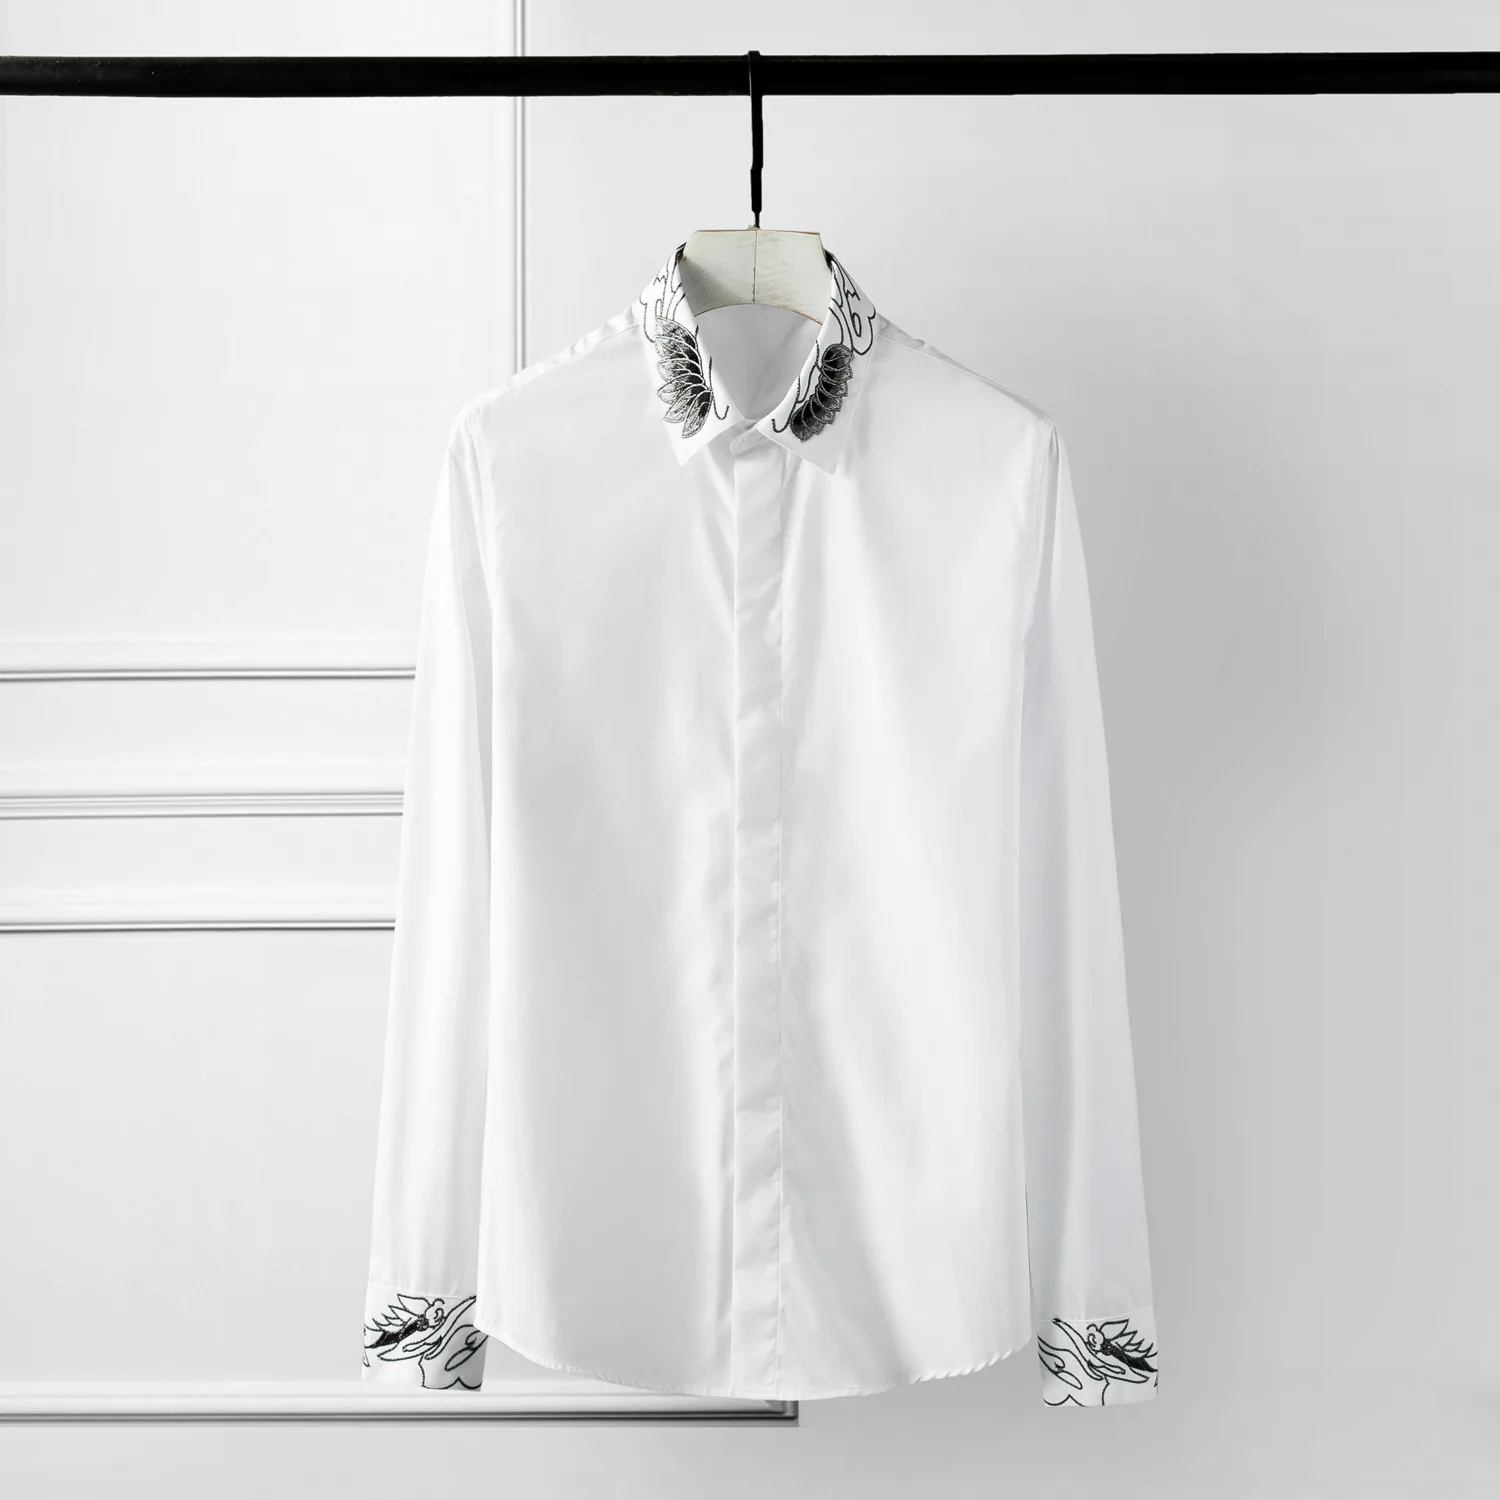 

Mignlu White Luxury Wings Embroidery Long Sleeve Mens Dress Plus Size 4xl Hight Quality Slim Fit Man Shirts